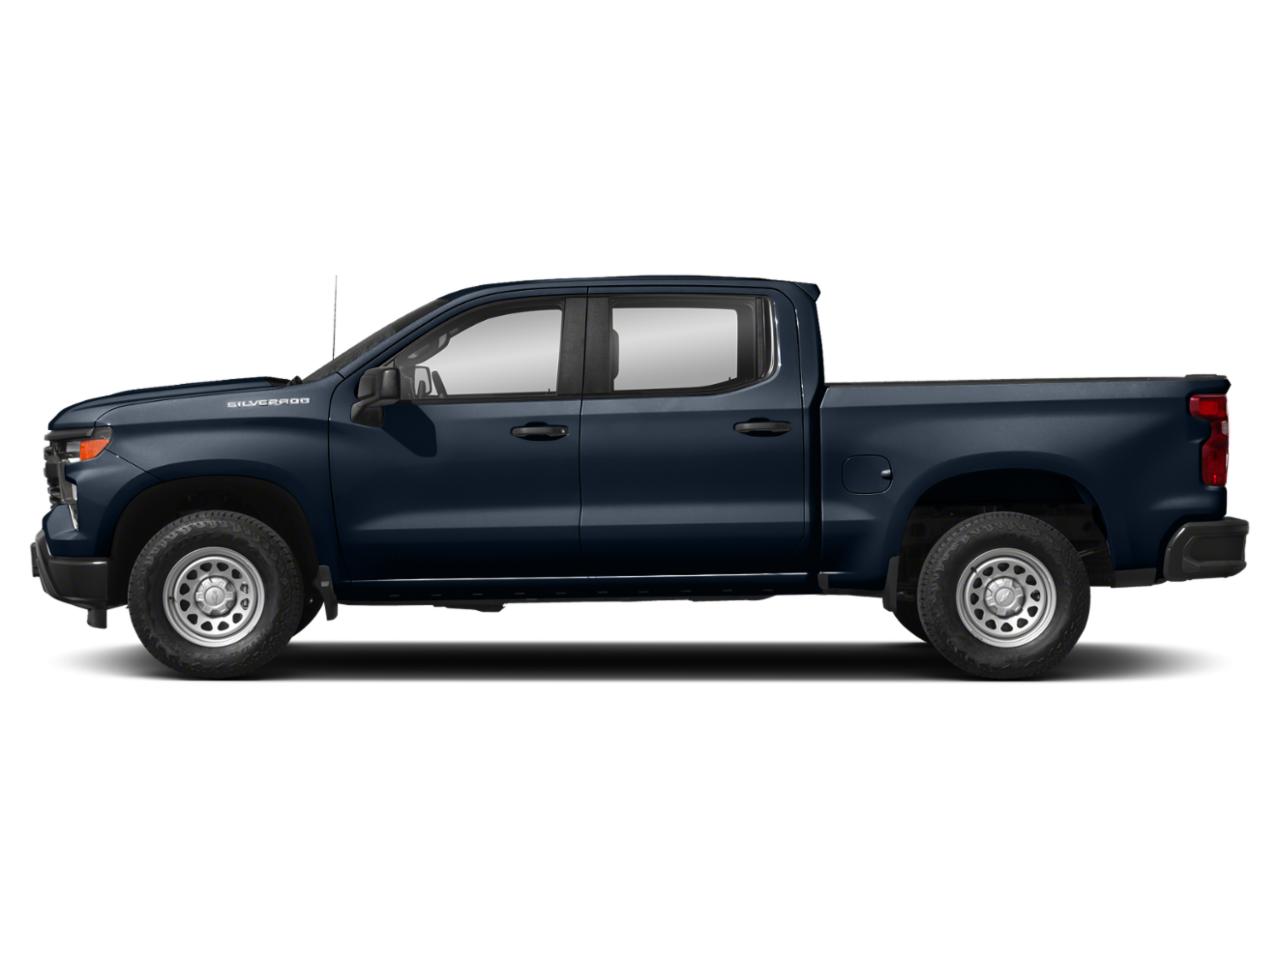 Used 2022 Chevrolet Silverado 1500 LT with VIN 1GCUDDEDXNZ599744 for sale in Little Rock